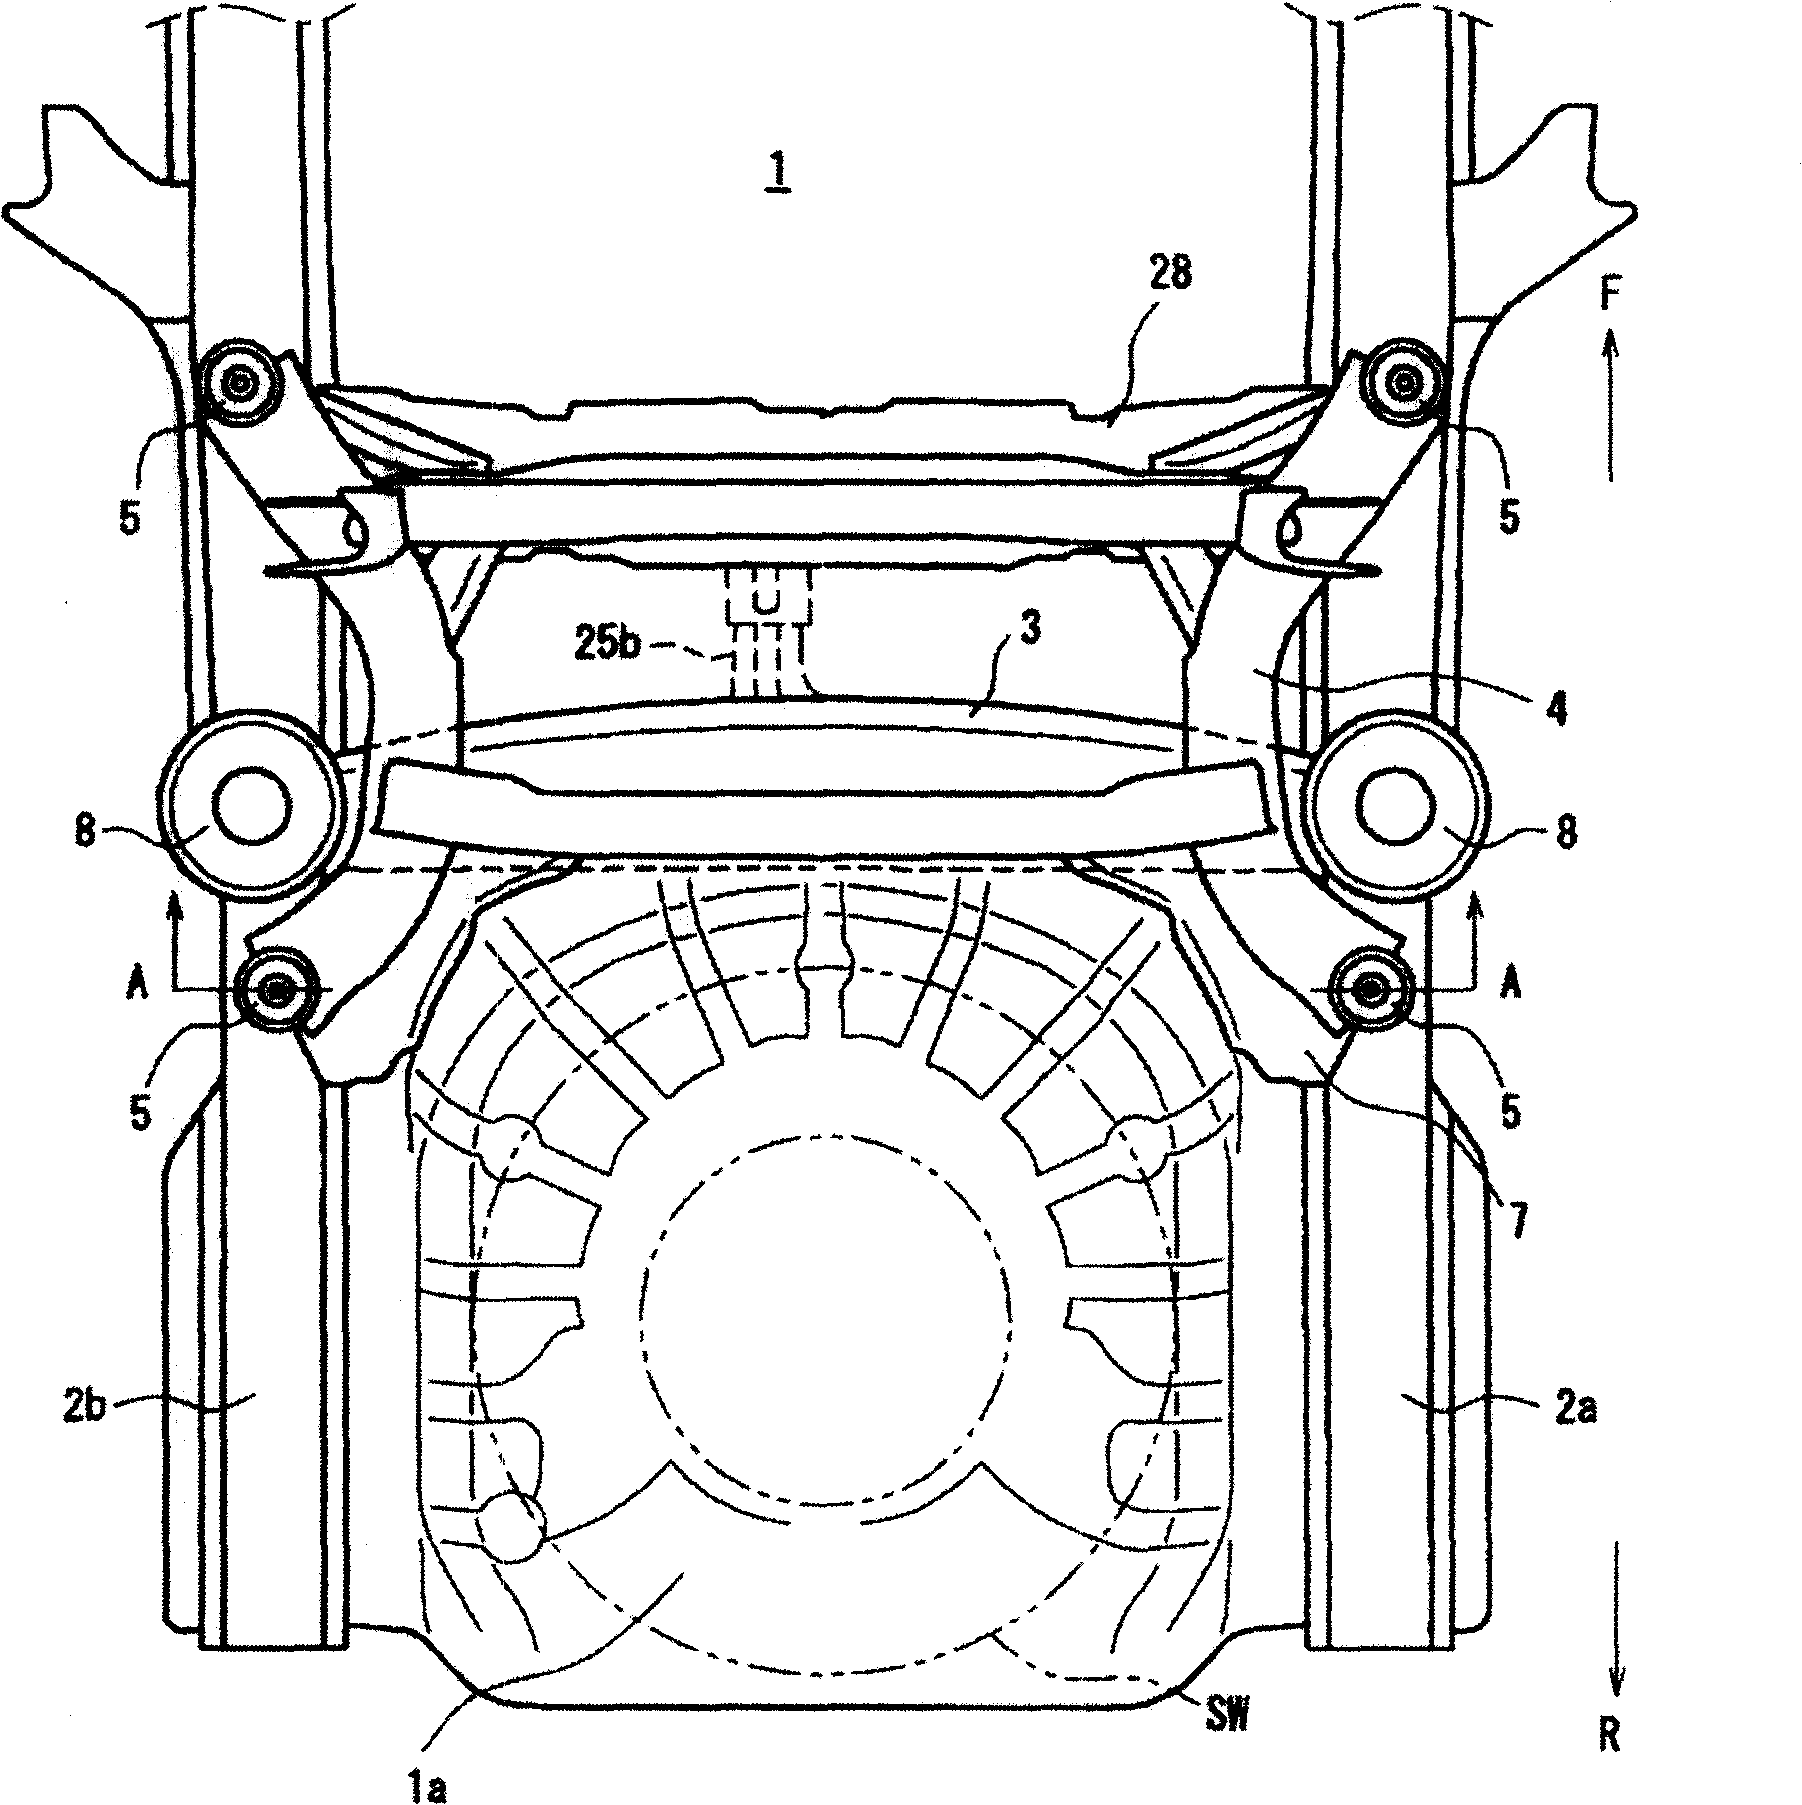 Lower structure of car body